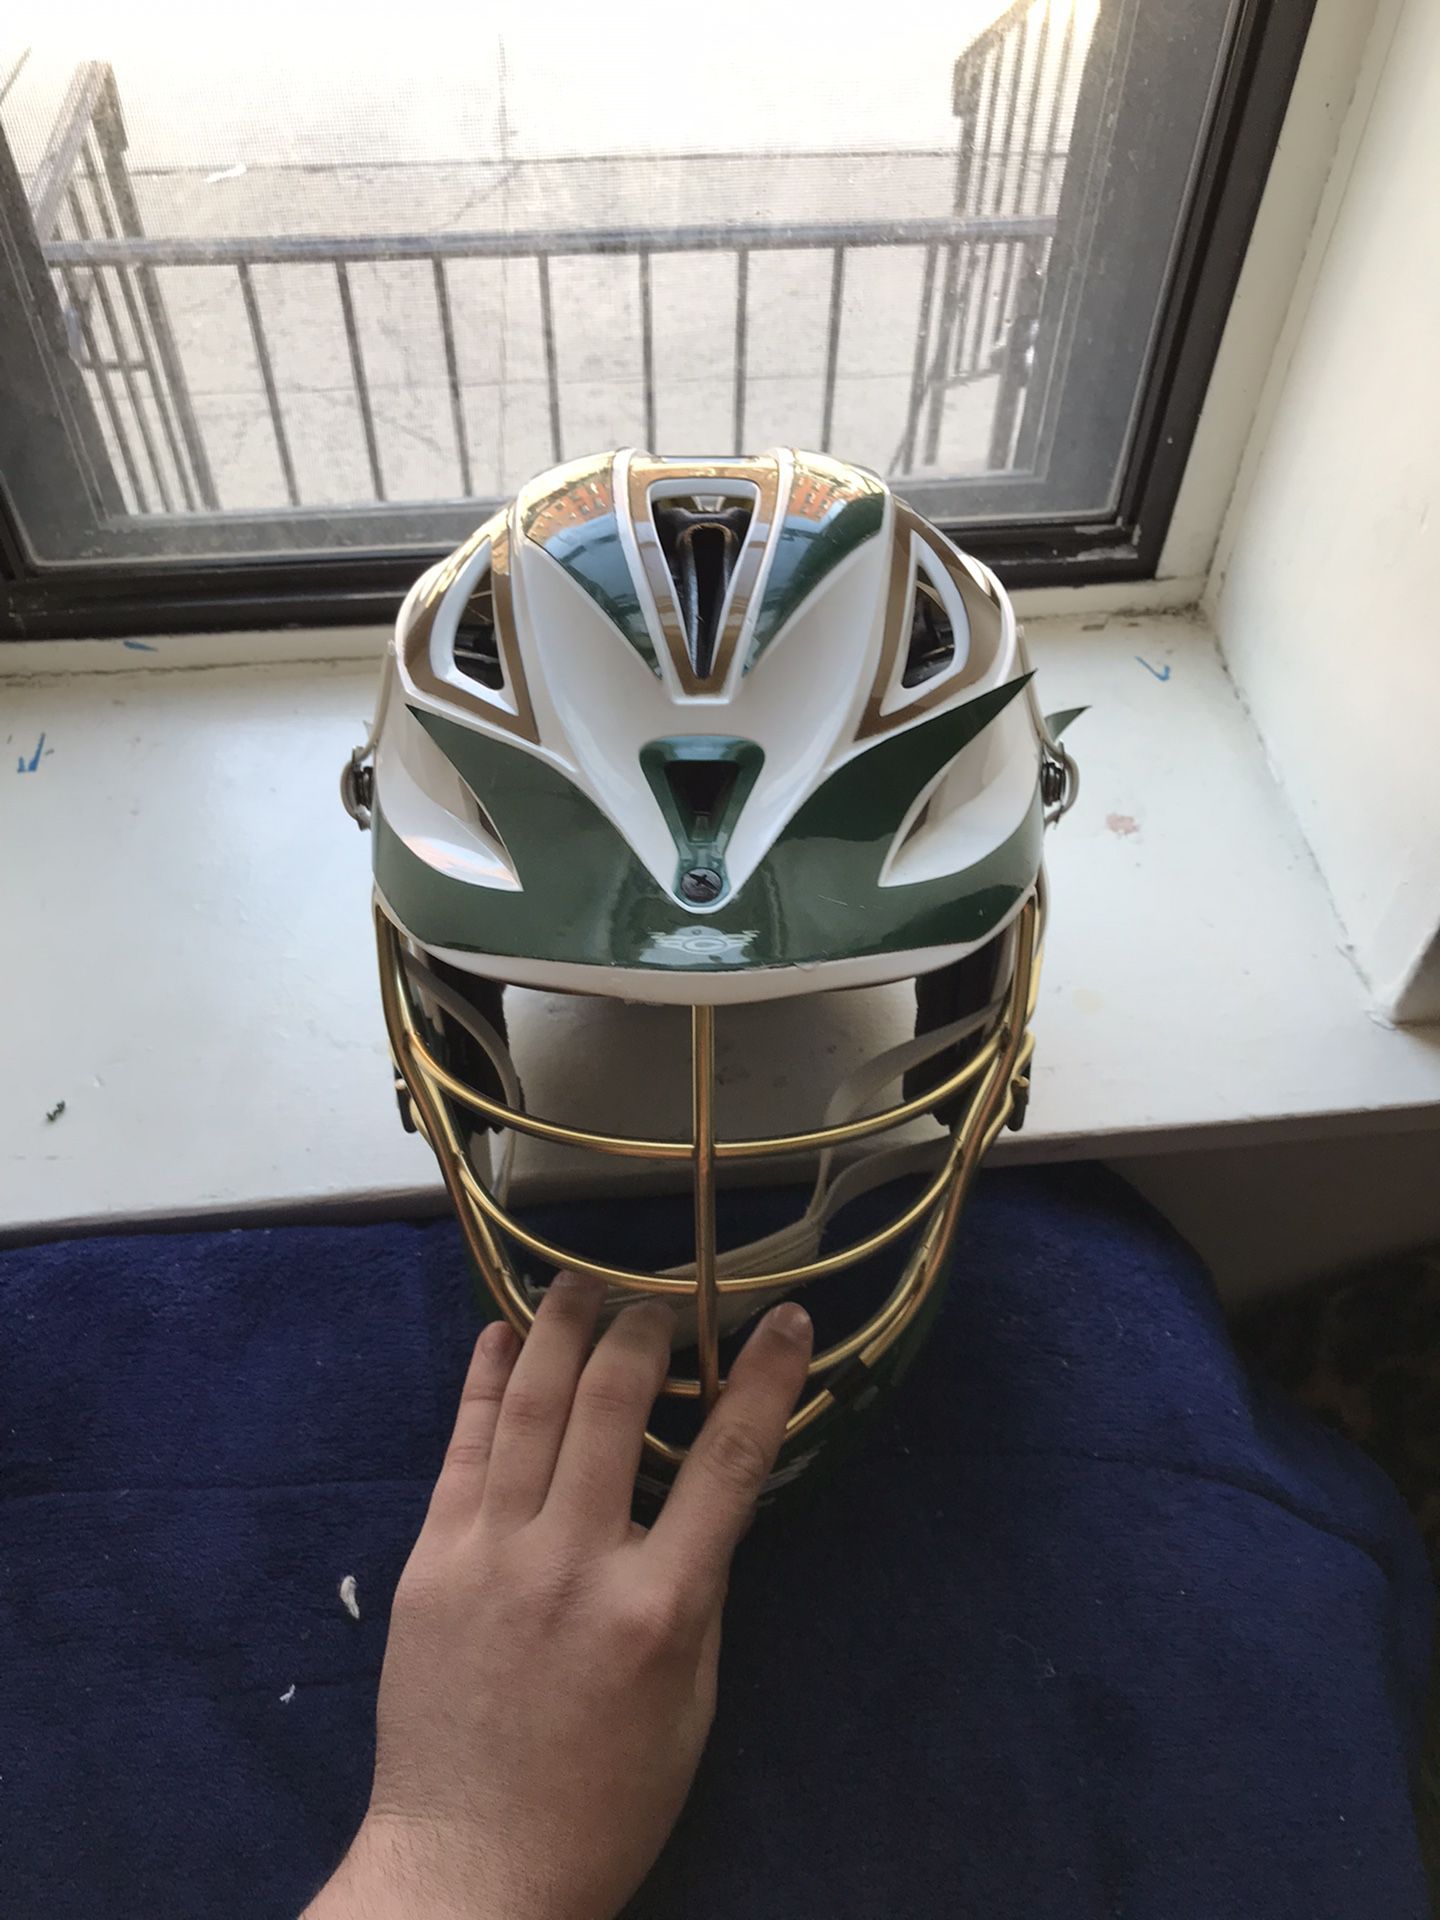 Cascade CPXR Adjustable Lacrosse Helmet With Goalie Throat Guard SKU  24(contact info removed) for Sale in Phoenix, AZ - OfferUp